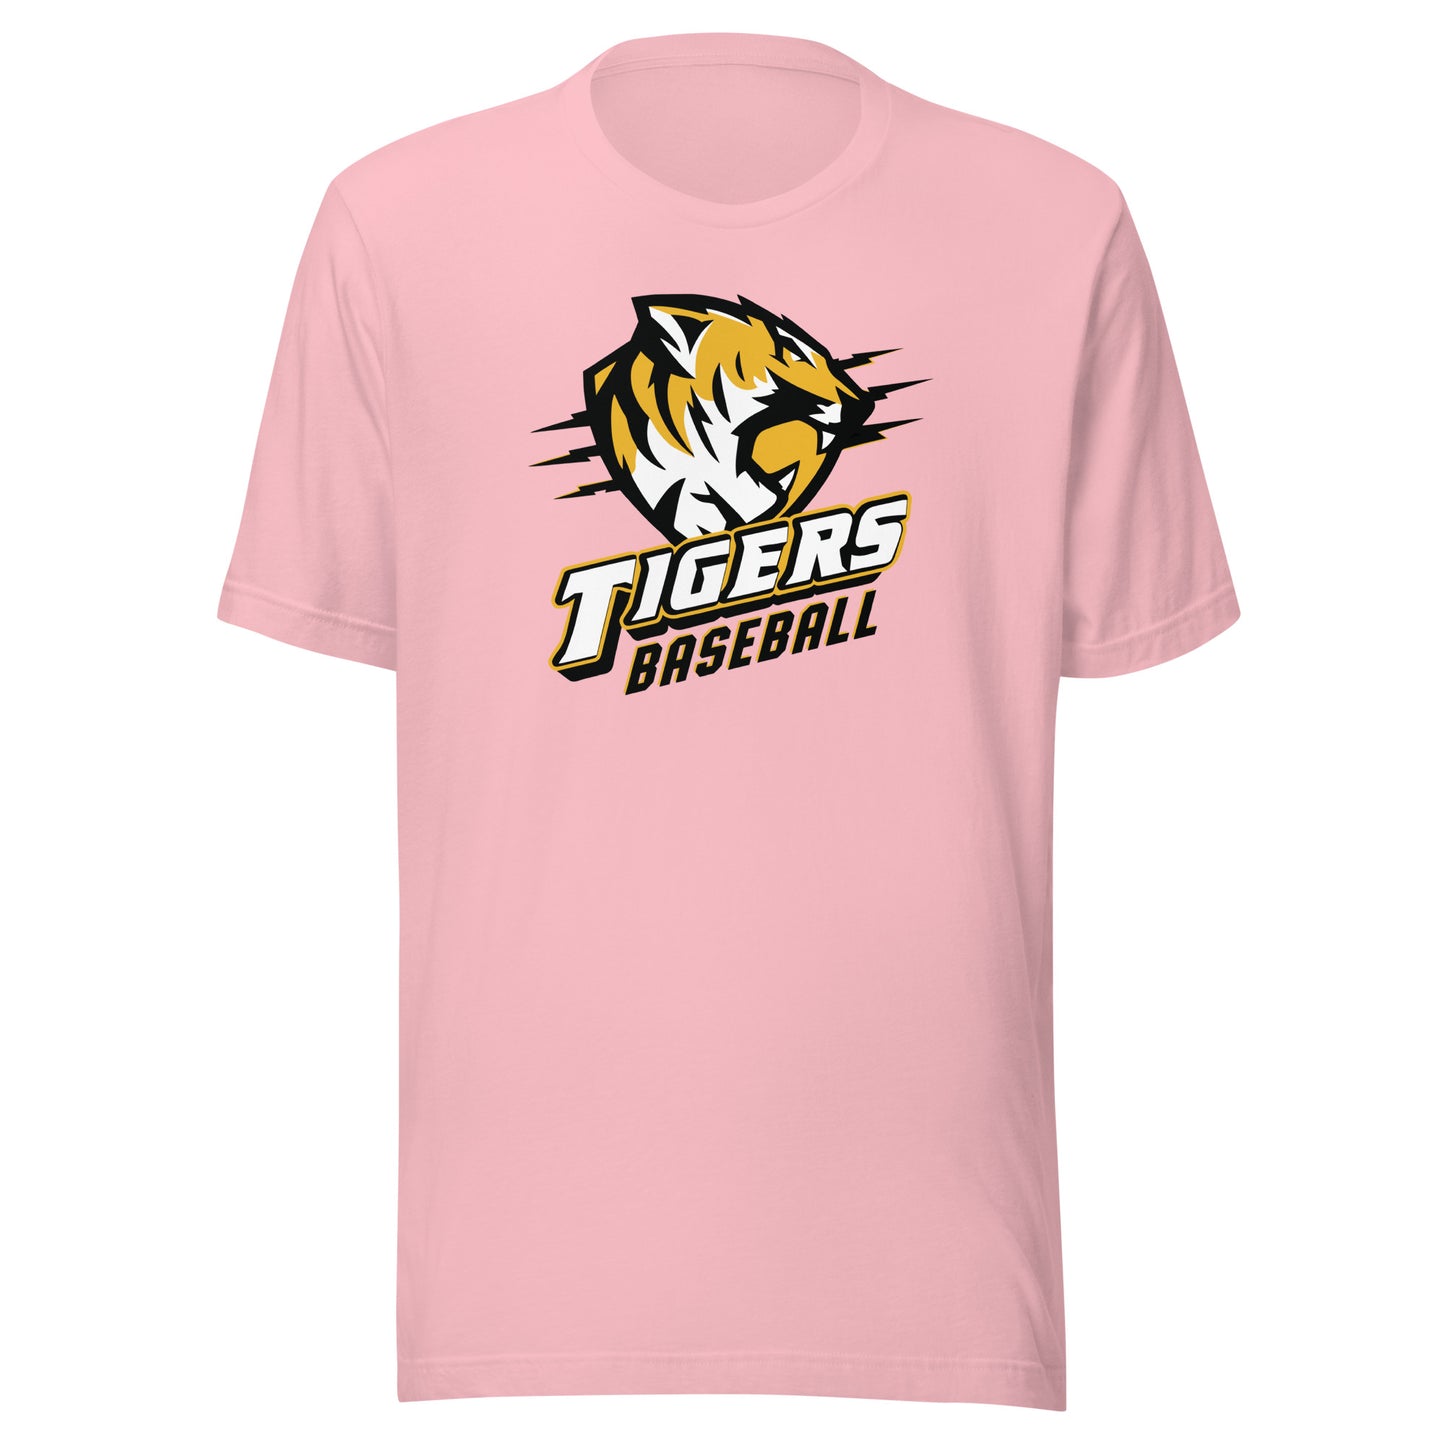 Tigers Baseball Bella Canvas Jersey Tee in Pink